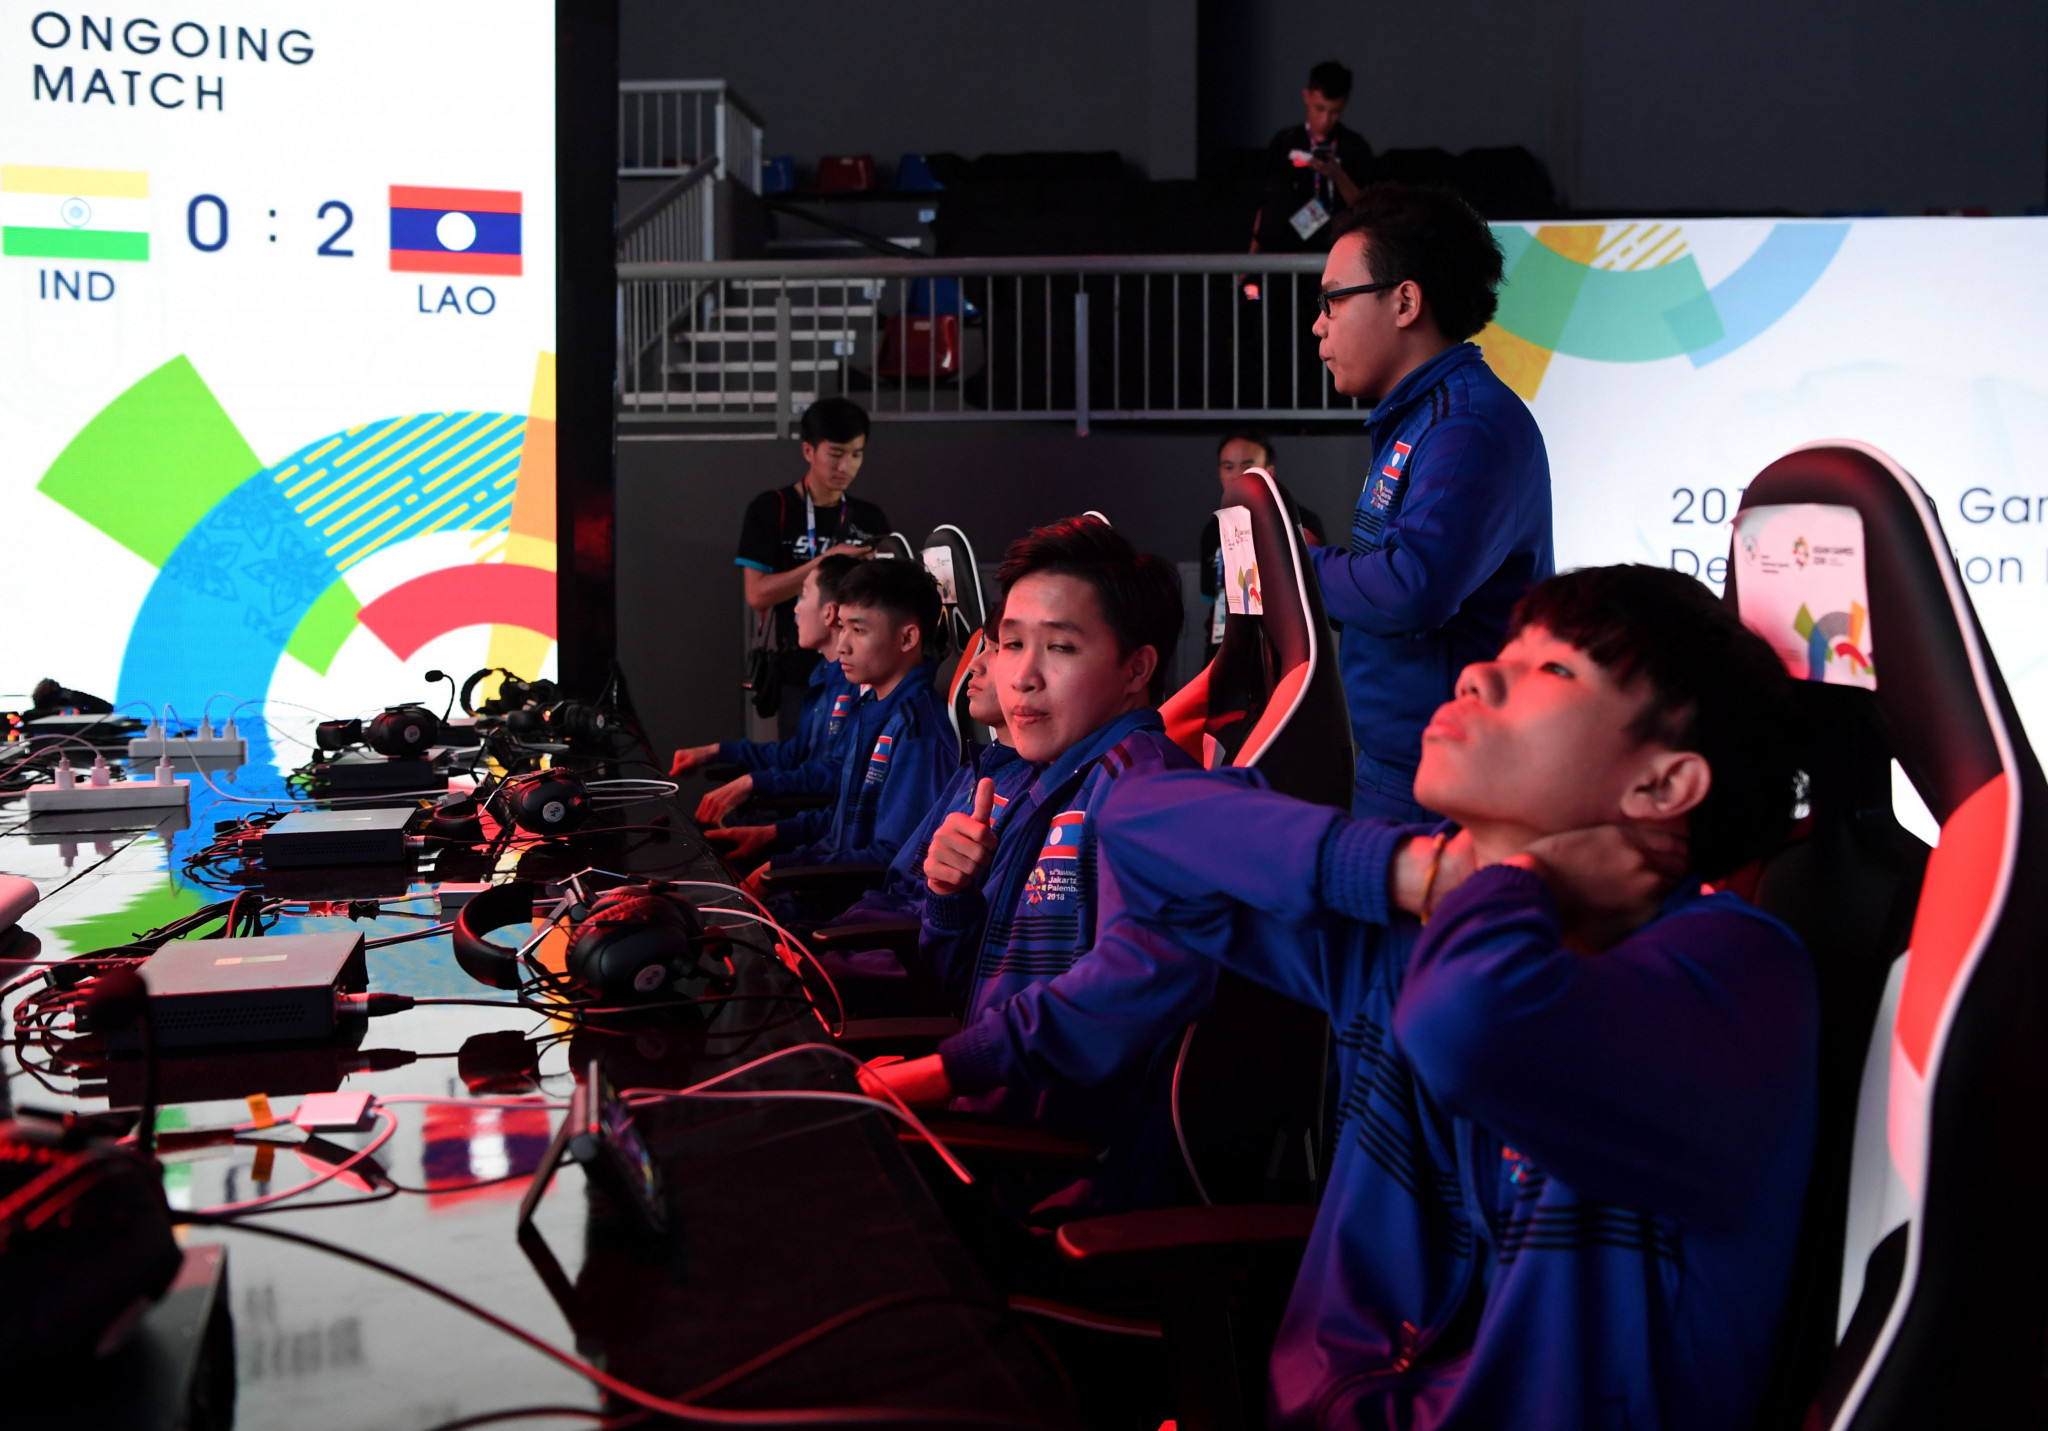 Esports is set to feature as a medal event at the Asian Games for the first time at Hangzhou 2022 ©Getty Images